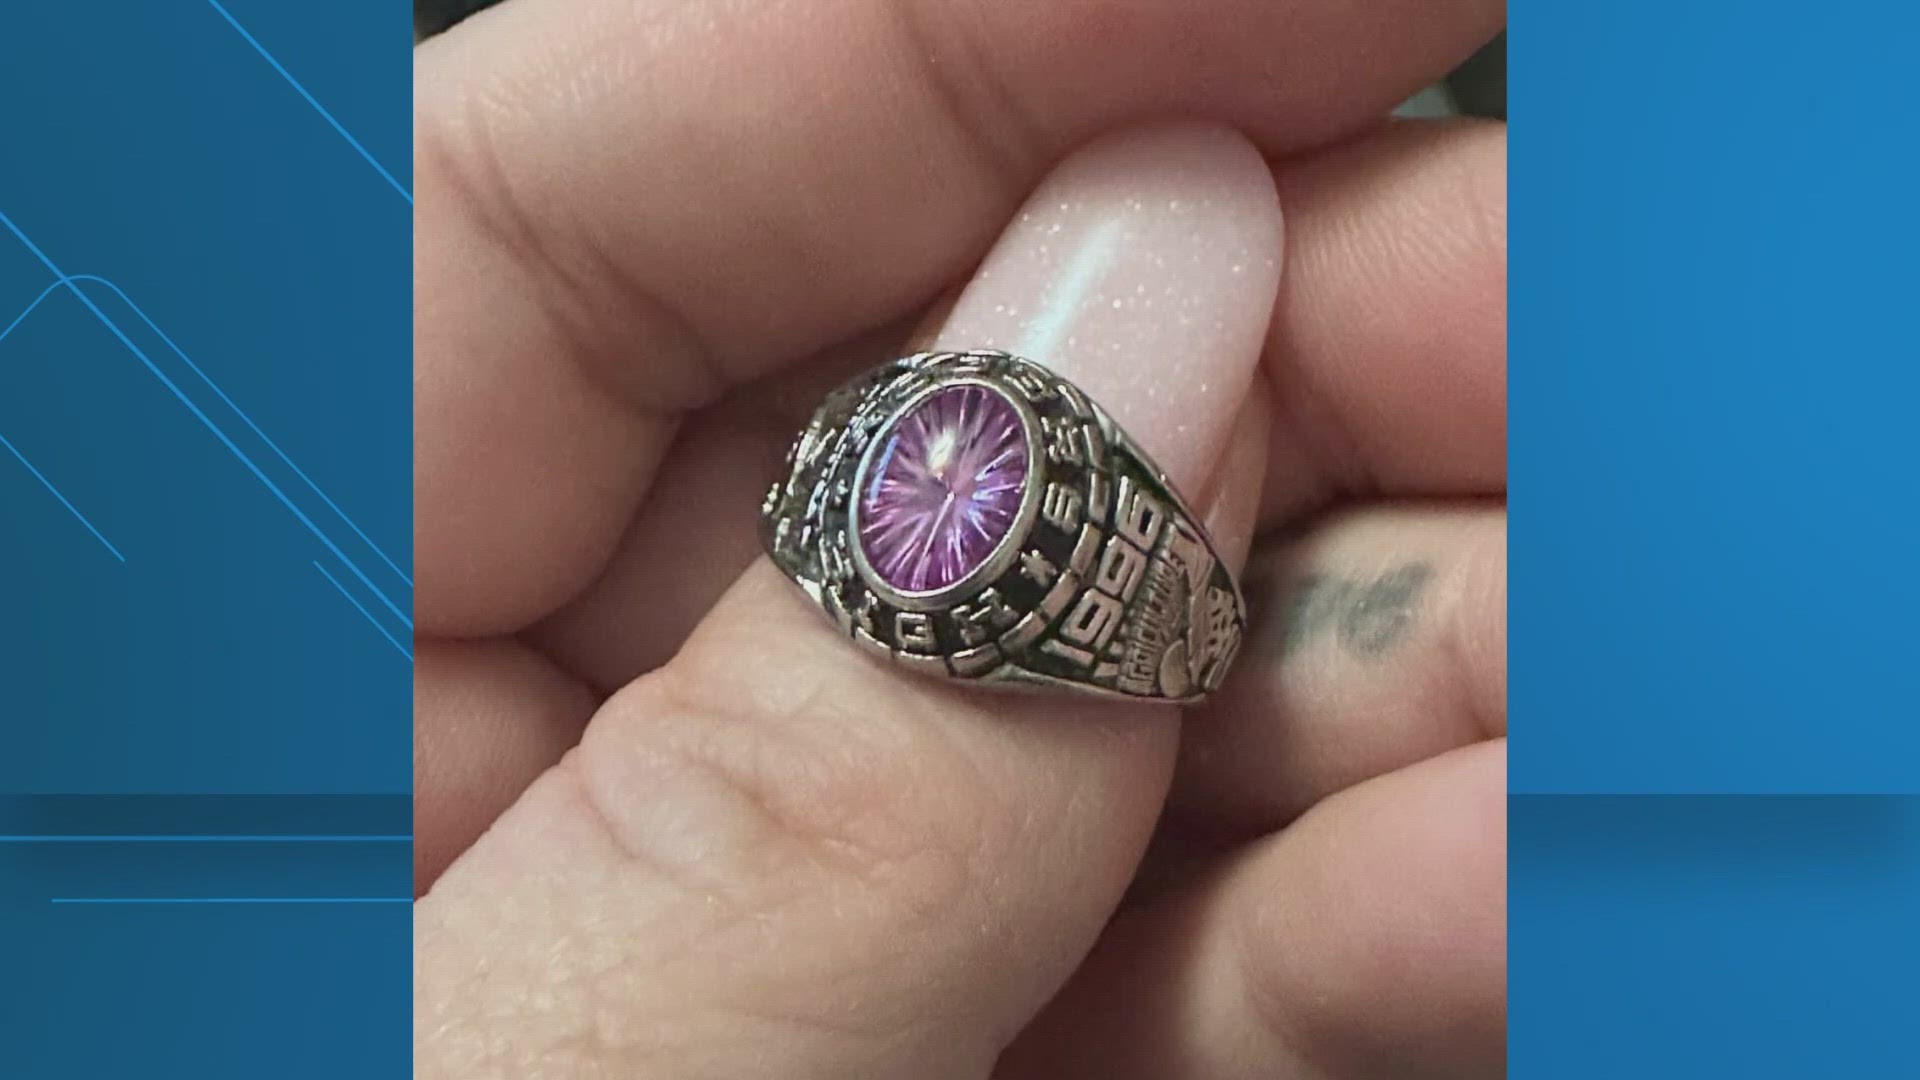 Autumn Entrop was stabbed to death by her husband in 2013. After being missing for over 20 years, her ring is back home with her twin sister.